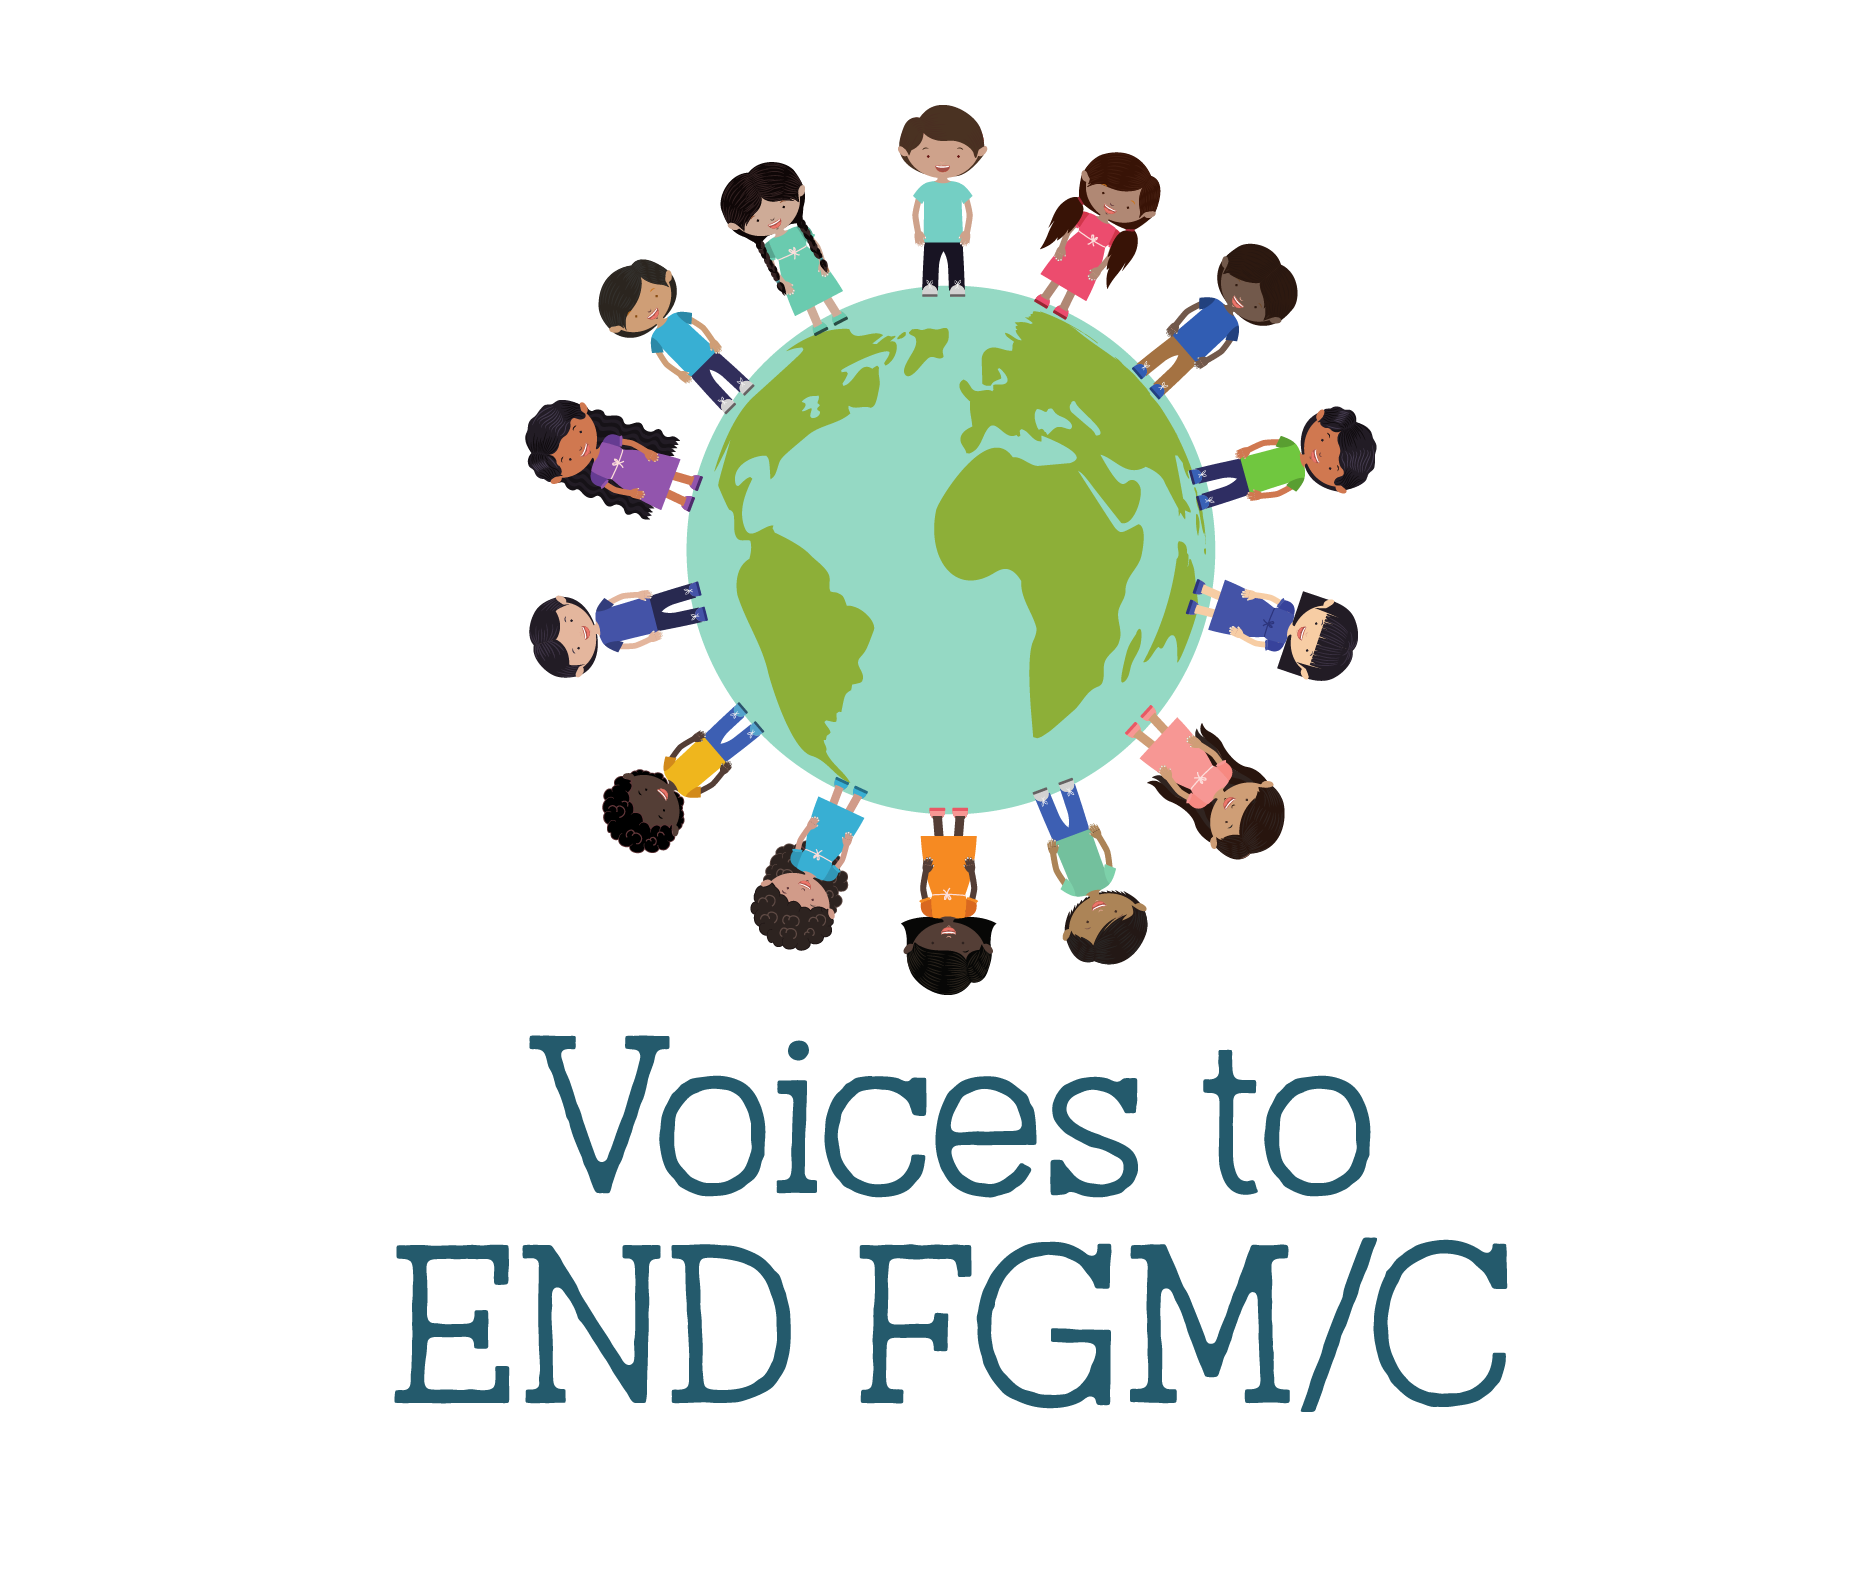 Voices to End FGM/C